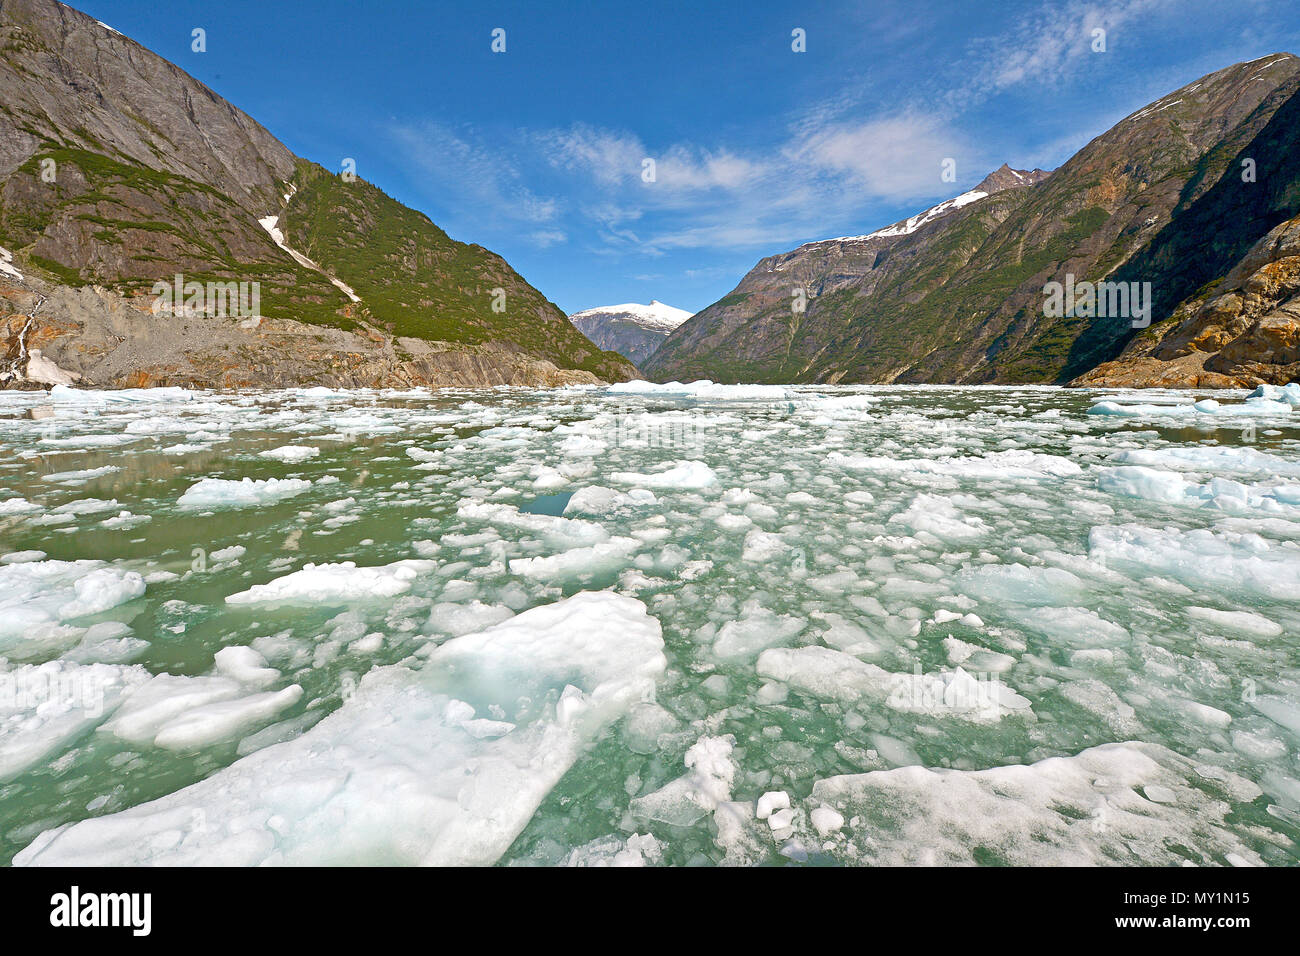 Meltwater and ice floes at Tracy Arm Fjord, Alaska, North Pacific, USA Stock Photo